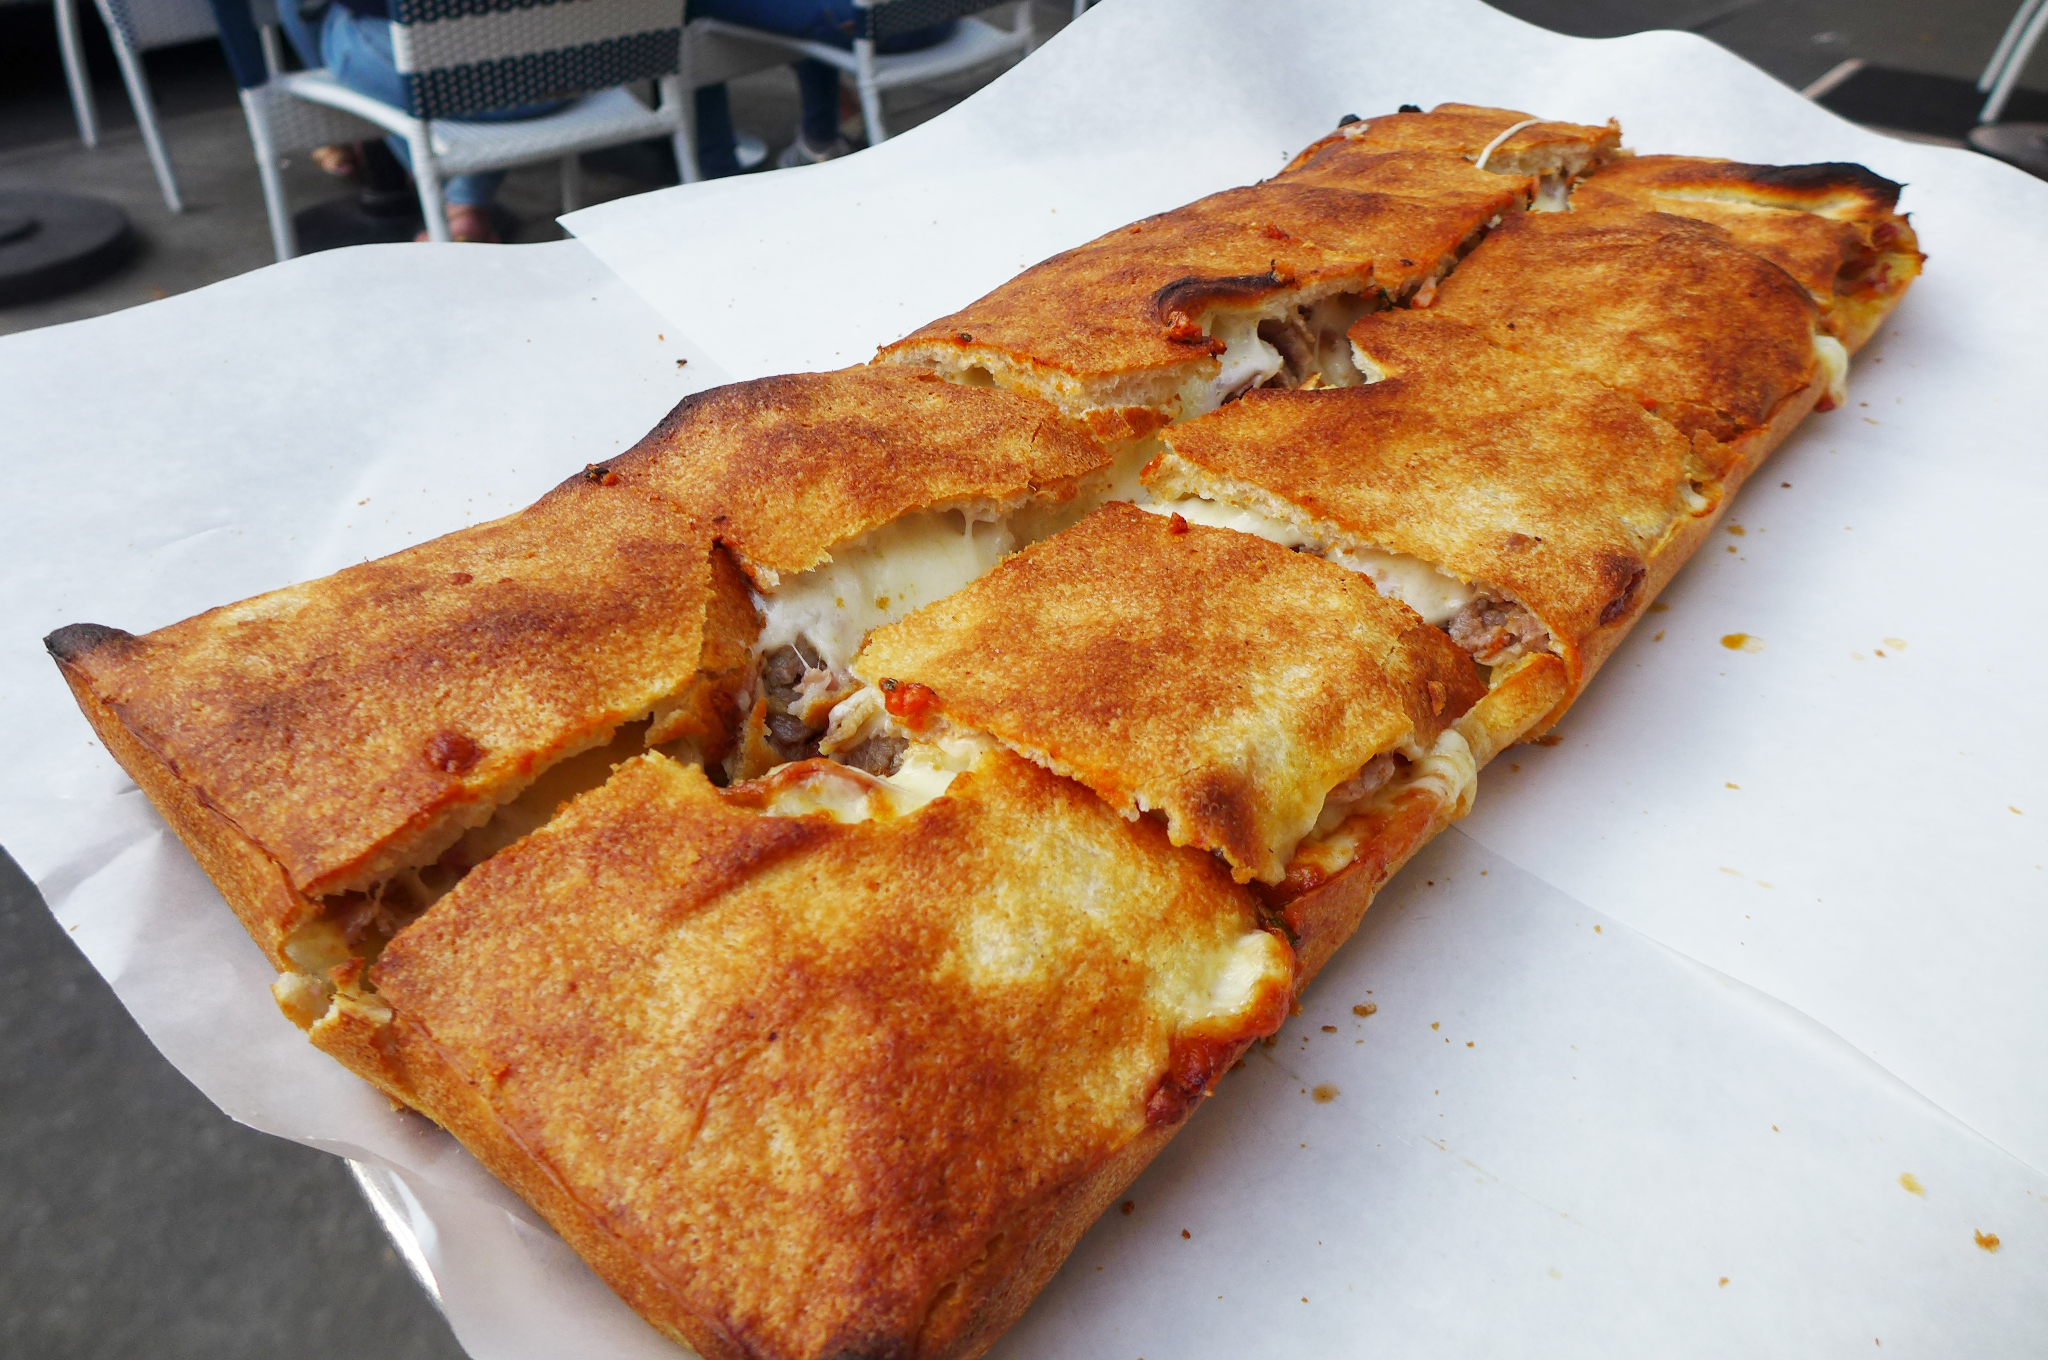 A rectangular pizza with a browned top crust.